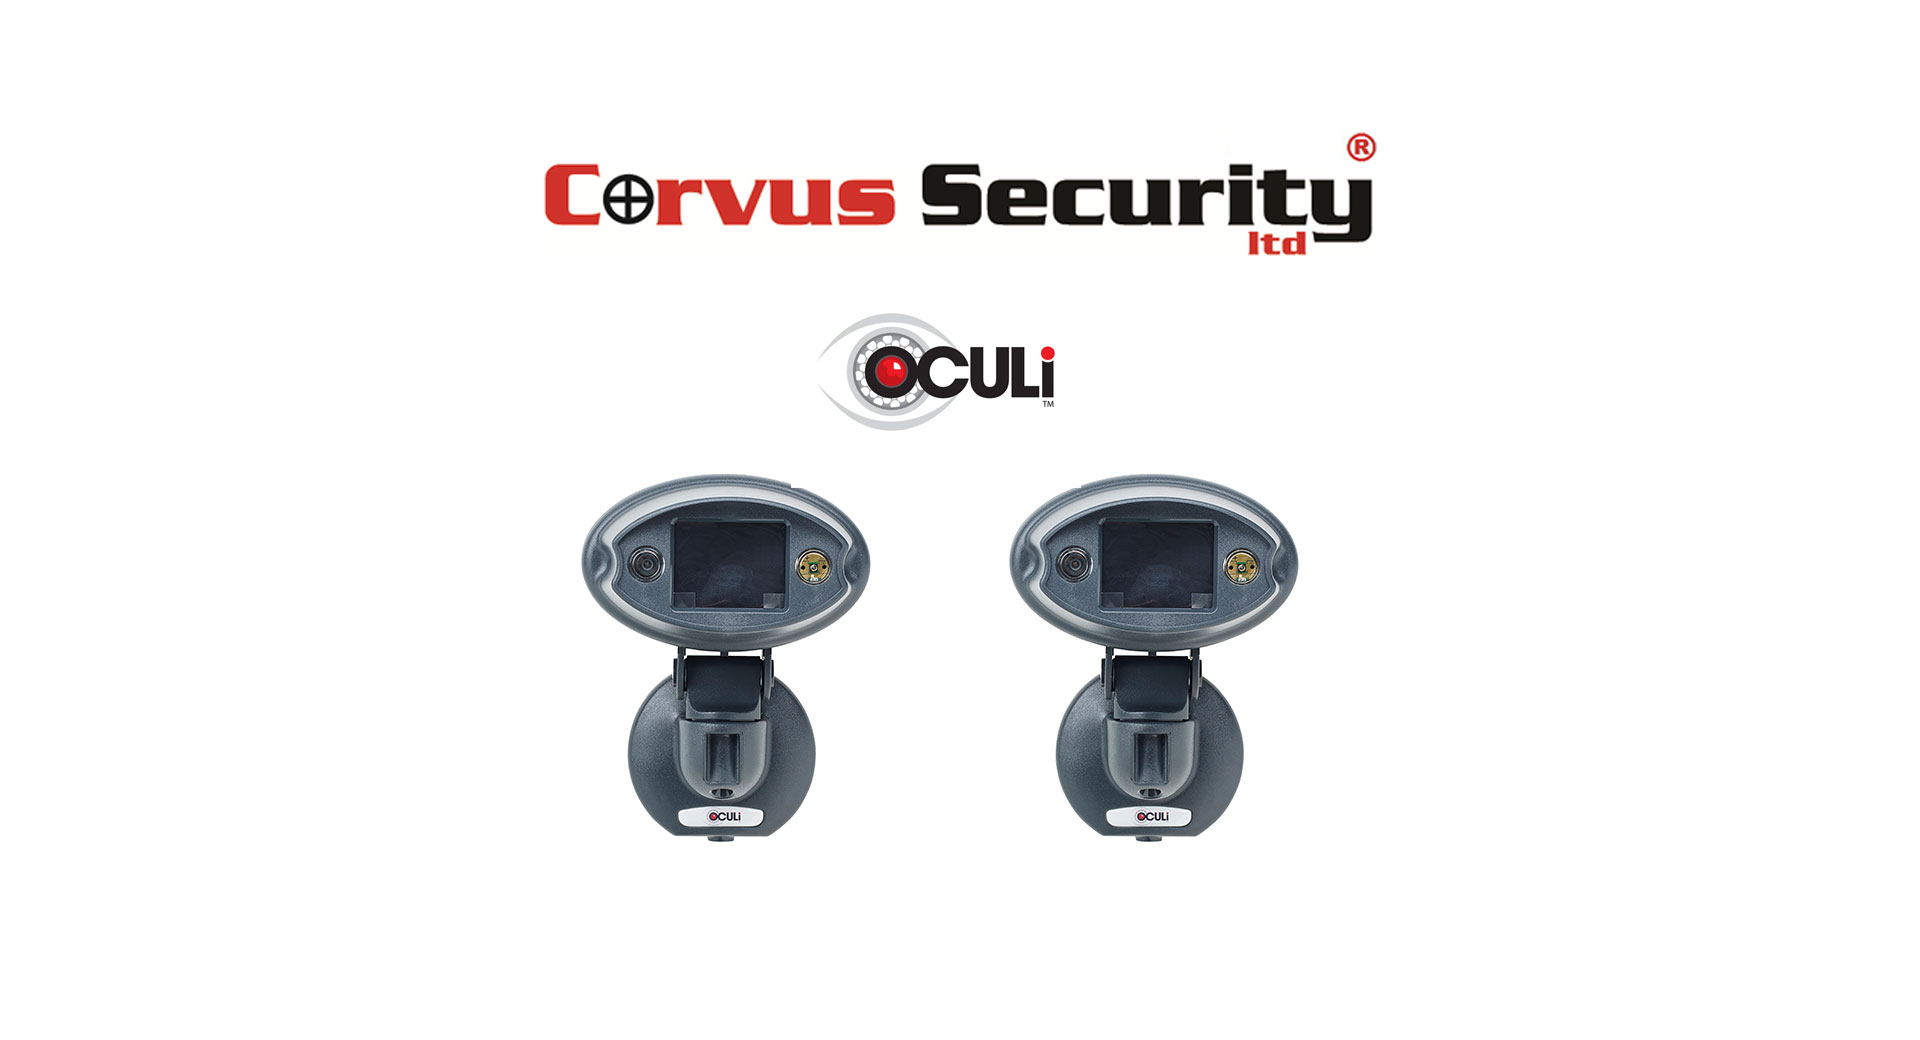 North Wales security specialist adds Oculi CCTV to existing portfolio of security services